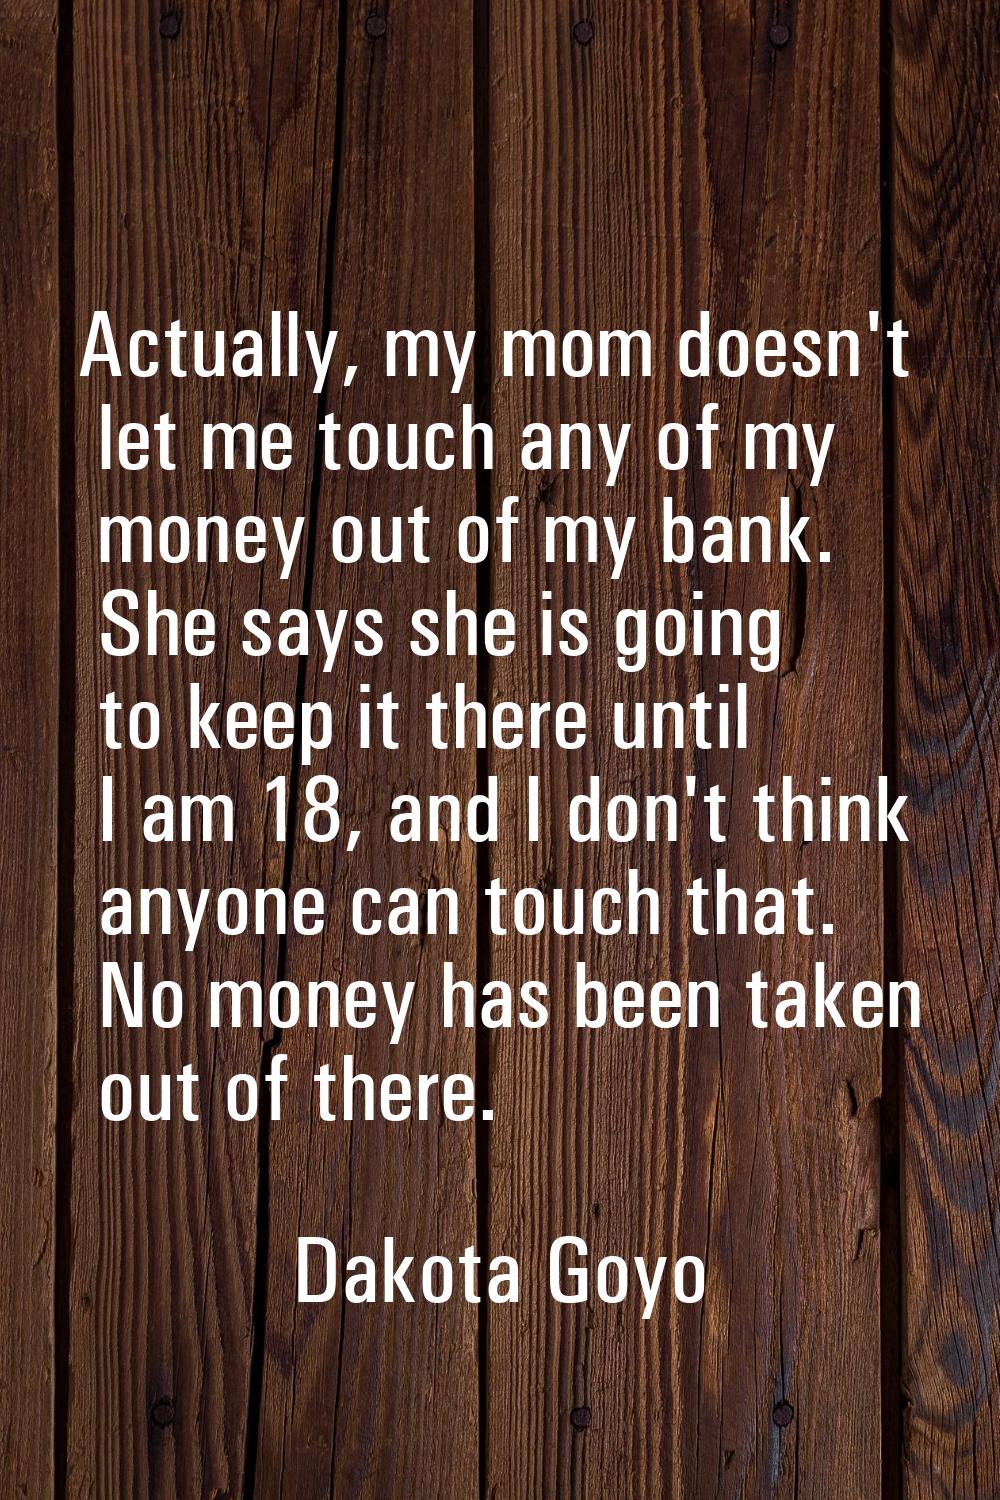 Actually, my mom doesn't let me touch any of my money out of my bank. She says she is going to keep